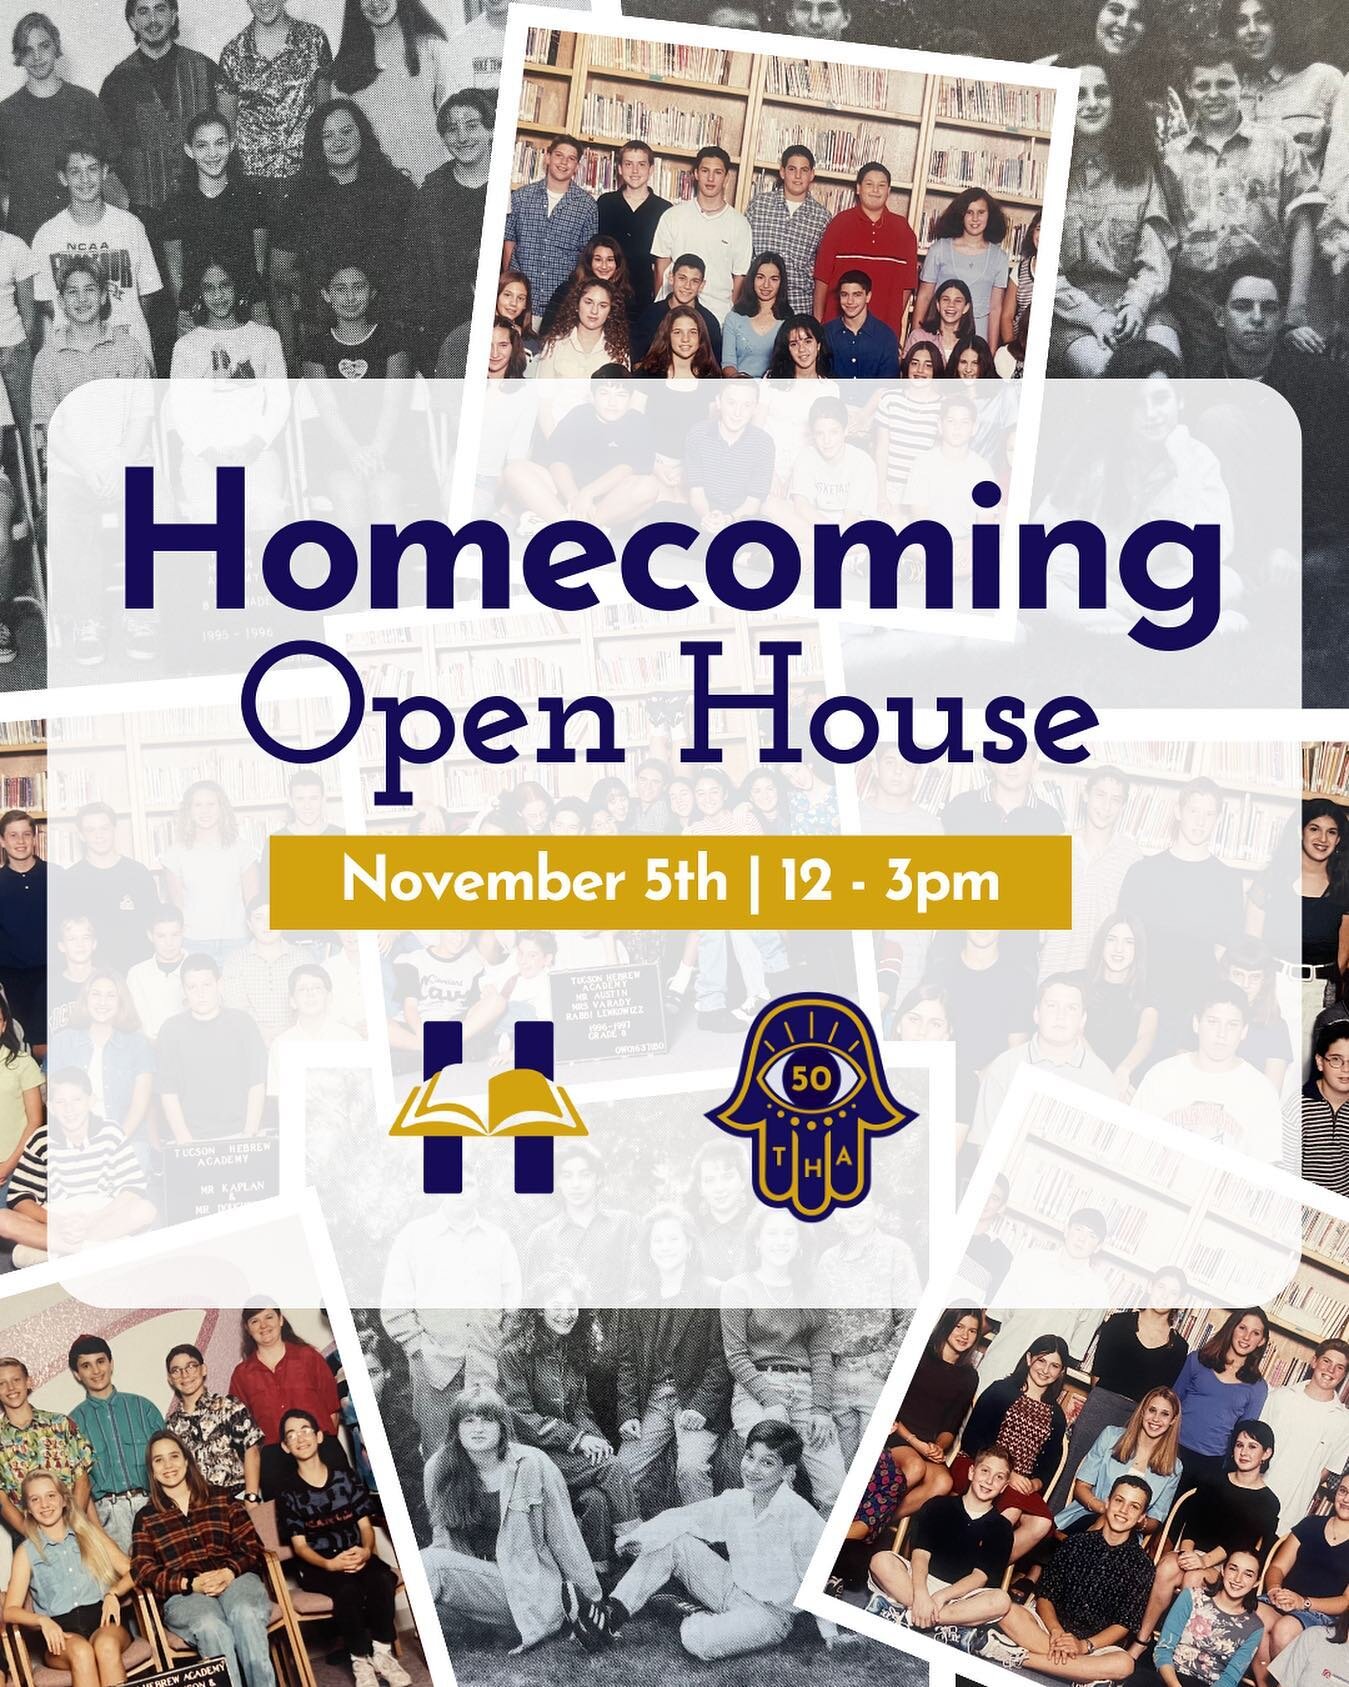 Once a Lion, Always a Lion! 🦁

On Sunday, November 5th, THA is hosting an open house homecoming for all! From alumni, to parents, to school supporters we invite you (and your families) to join us on campus for an afternoon of catching up with old fr